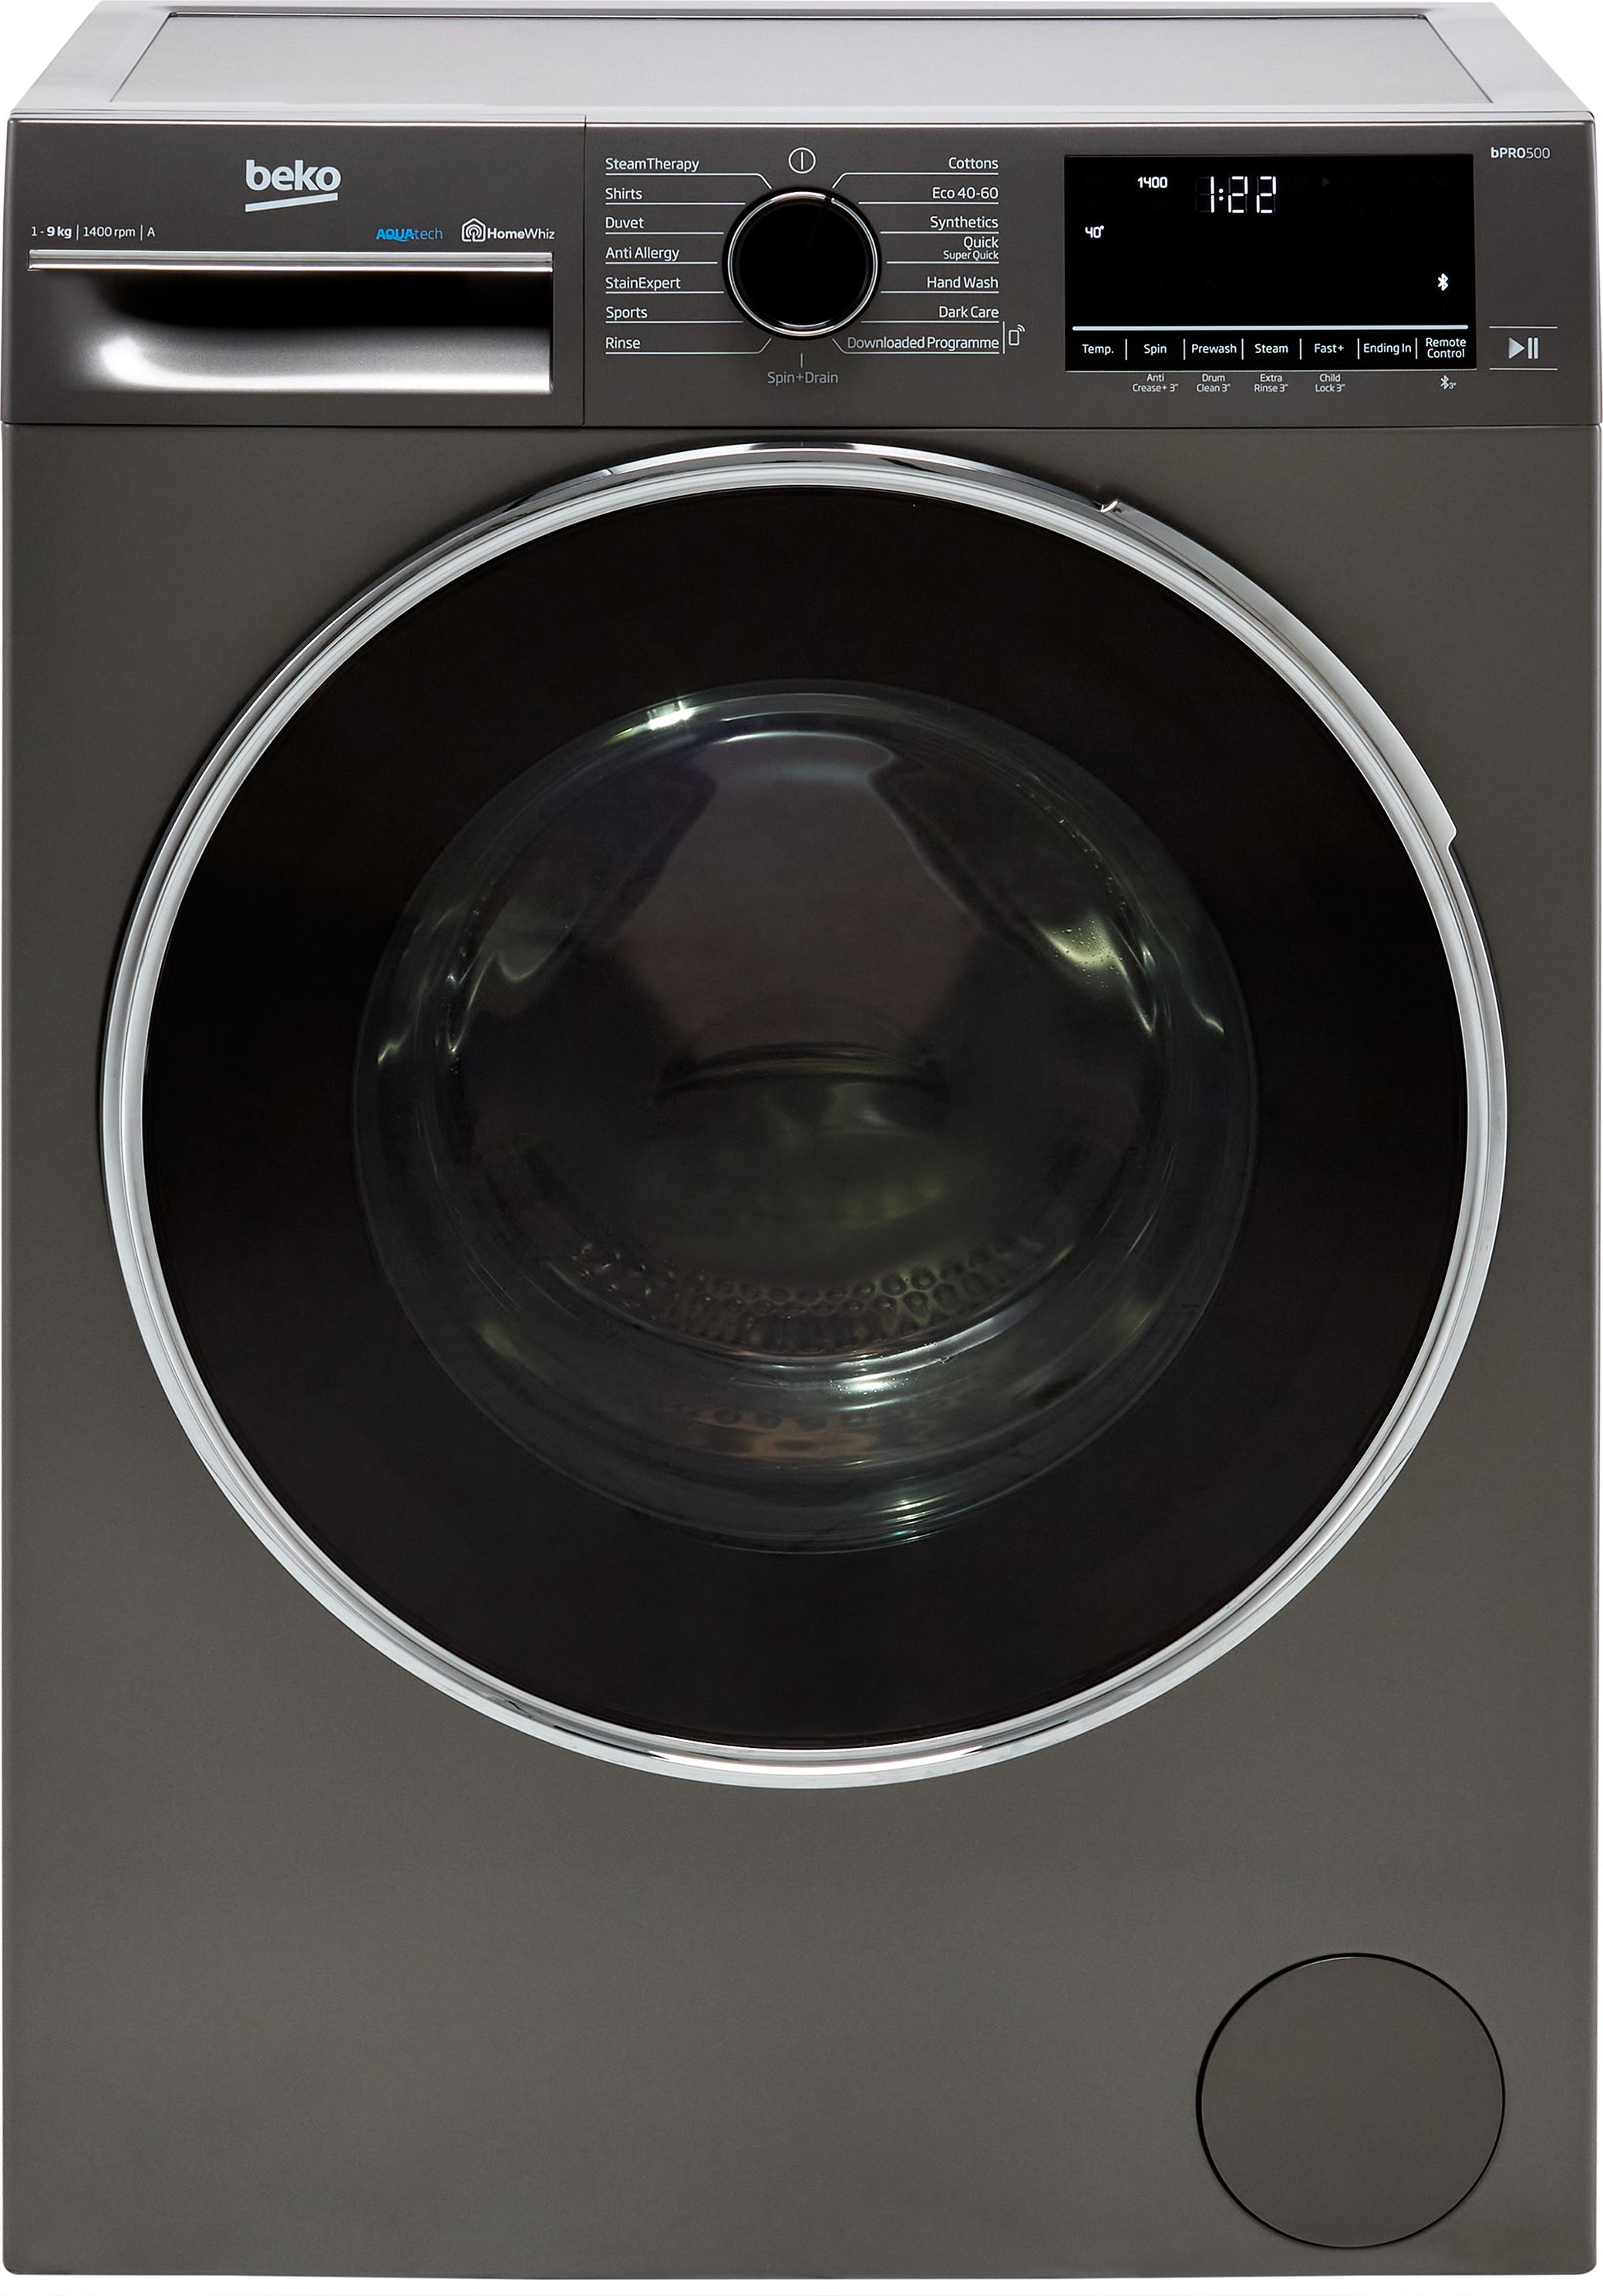 Beko B5W5941AG 9kg Washing Machine with 1400 rpm - Graphite - A Rated Silver